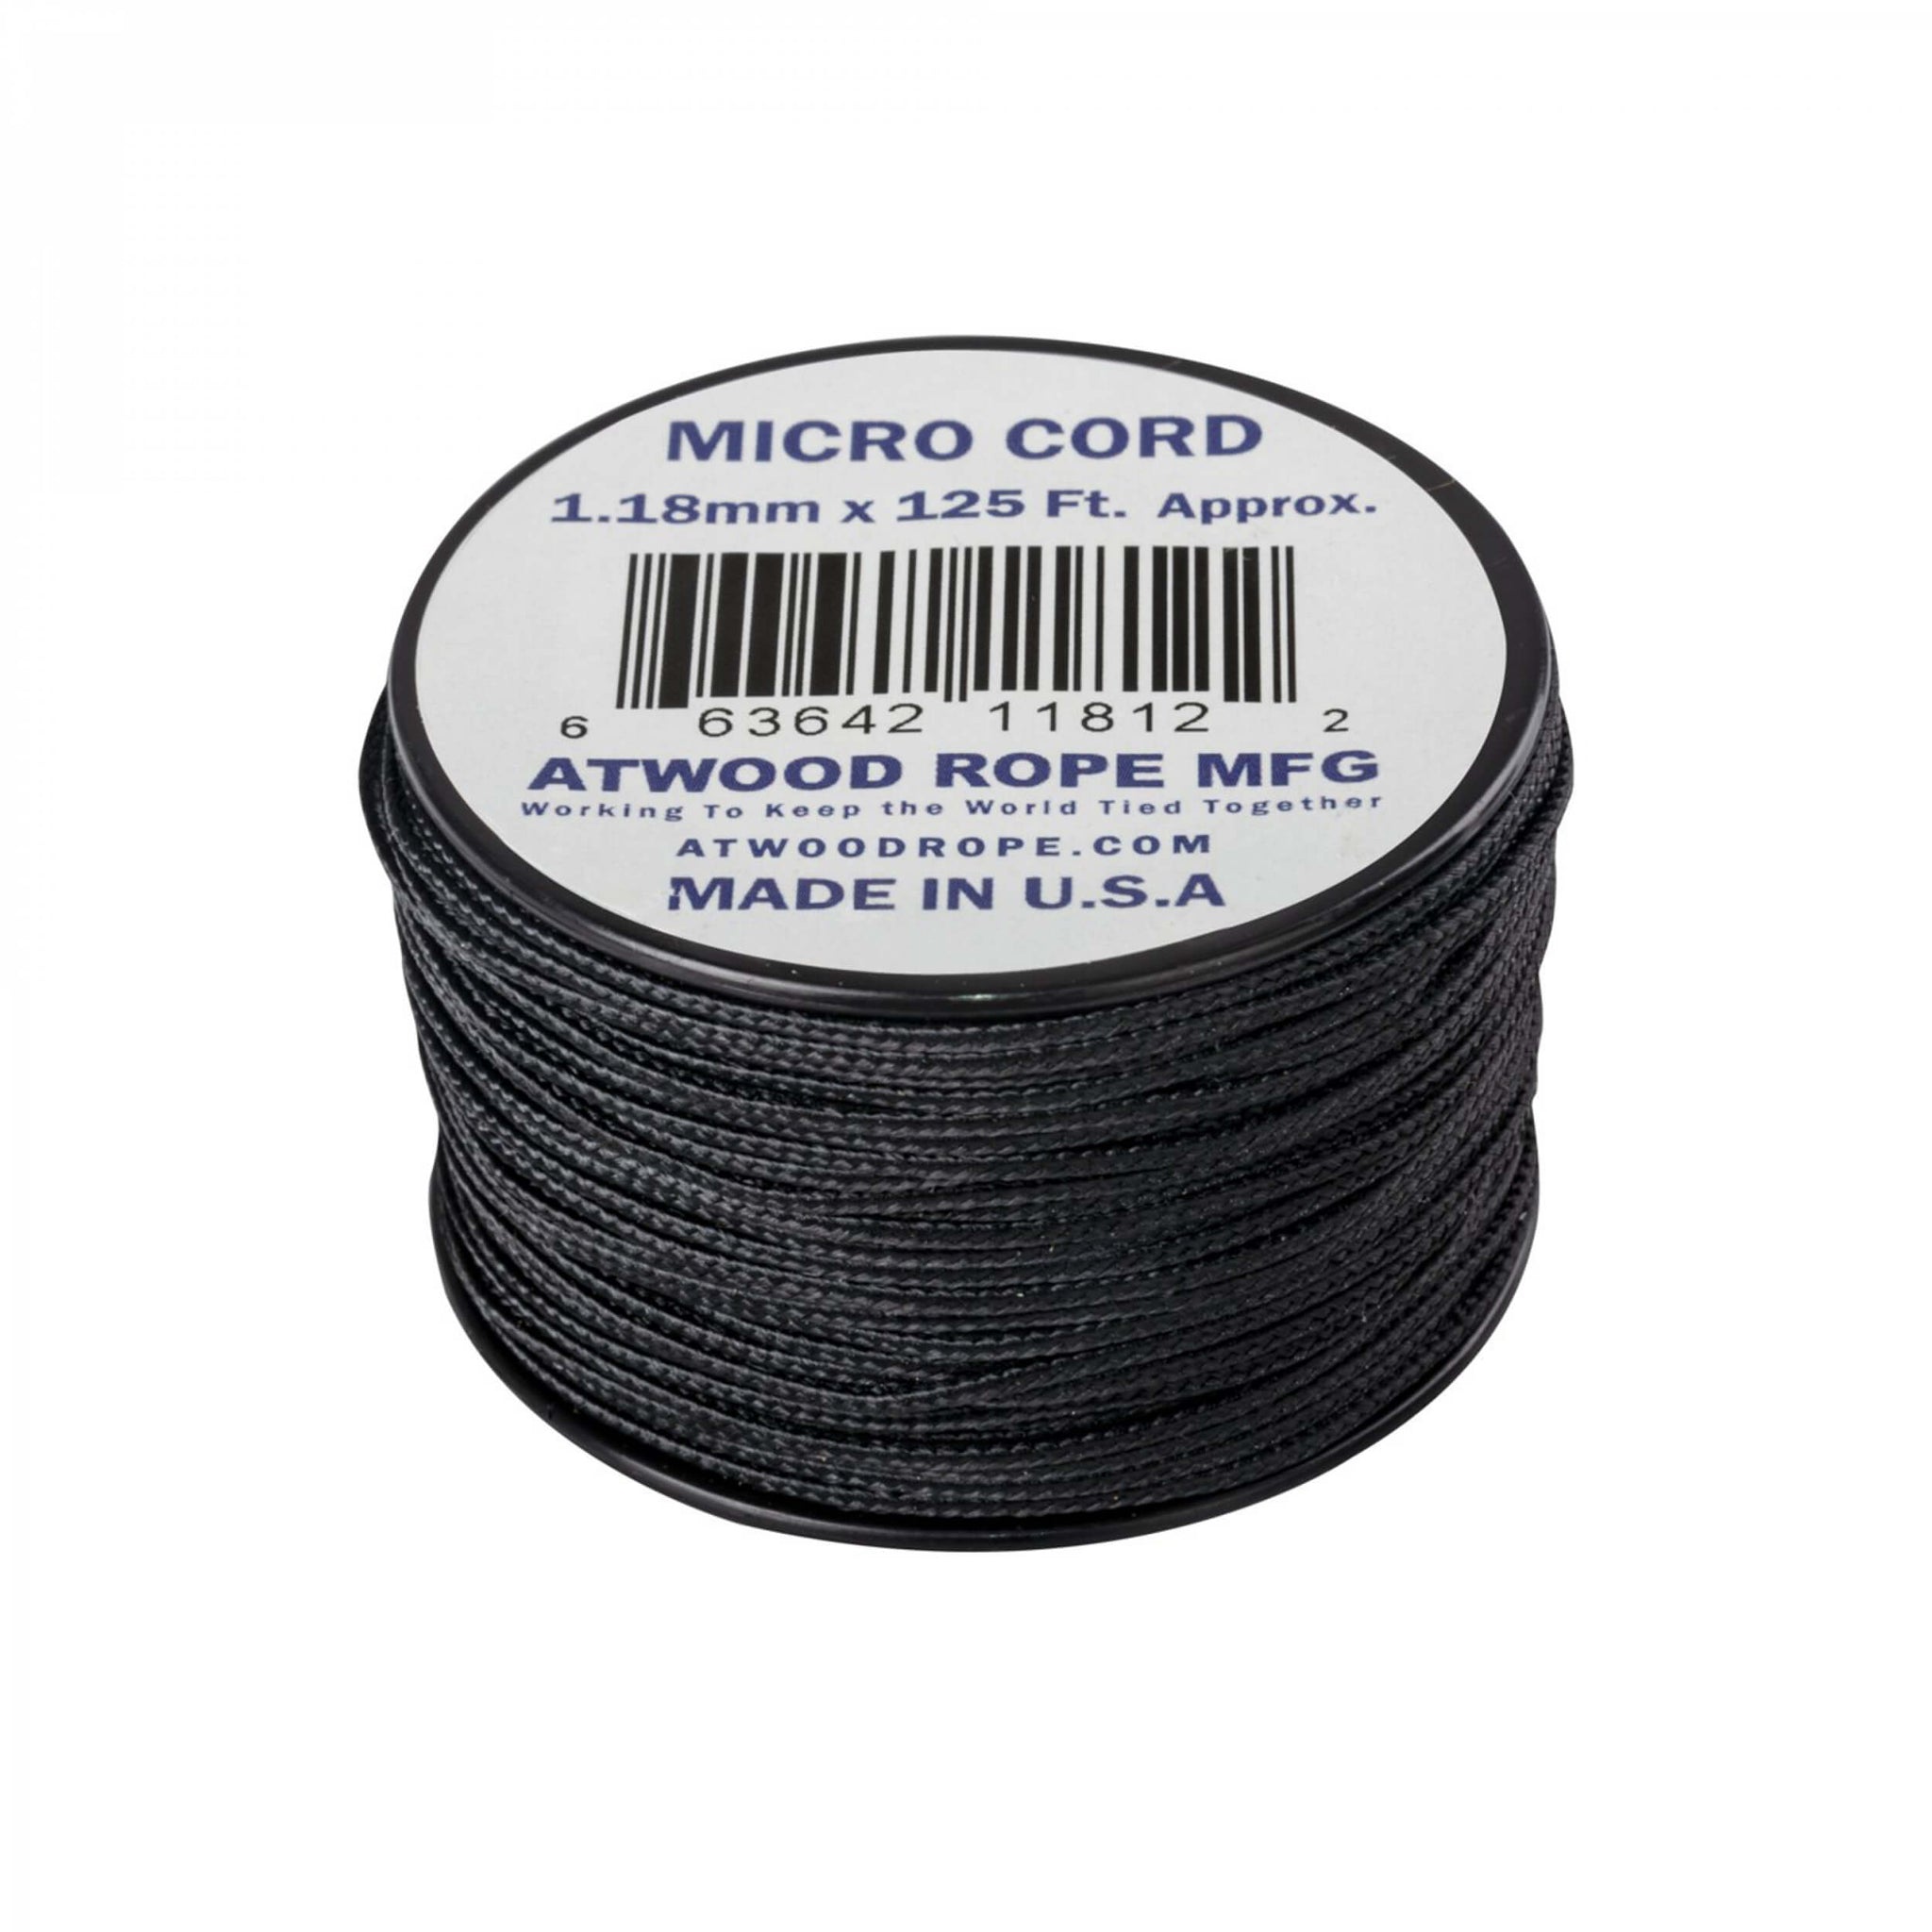 Atwood Rope Micro Cord 38 m black